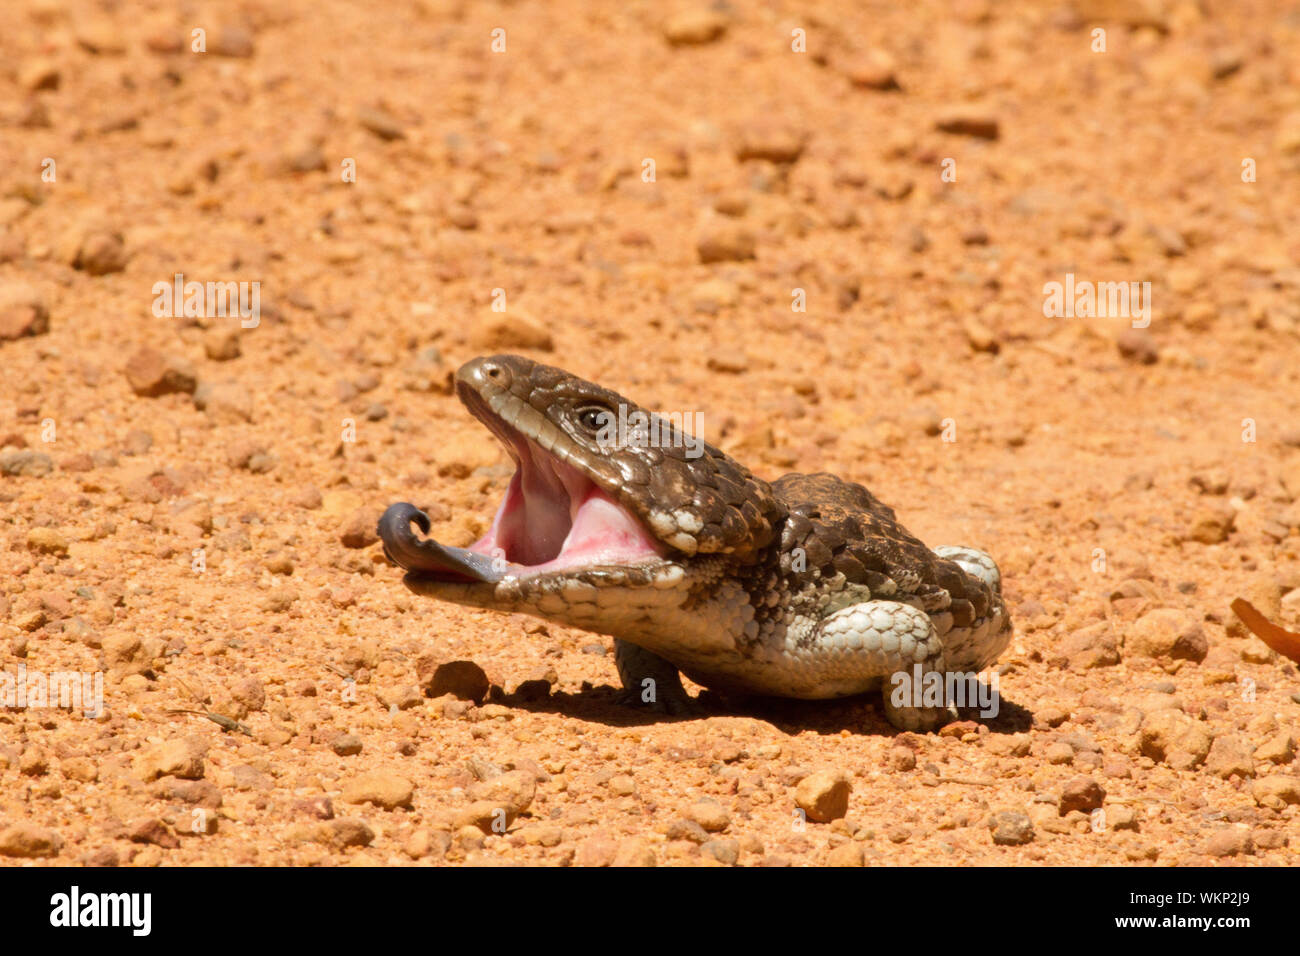 Close-up Of Lizard On Red Soil Stock Photo